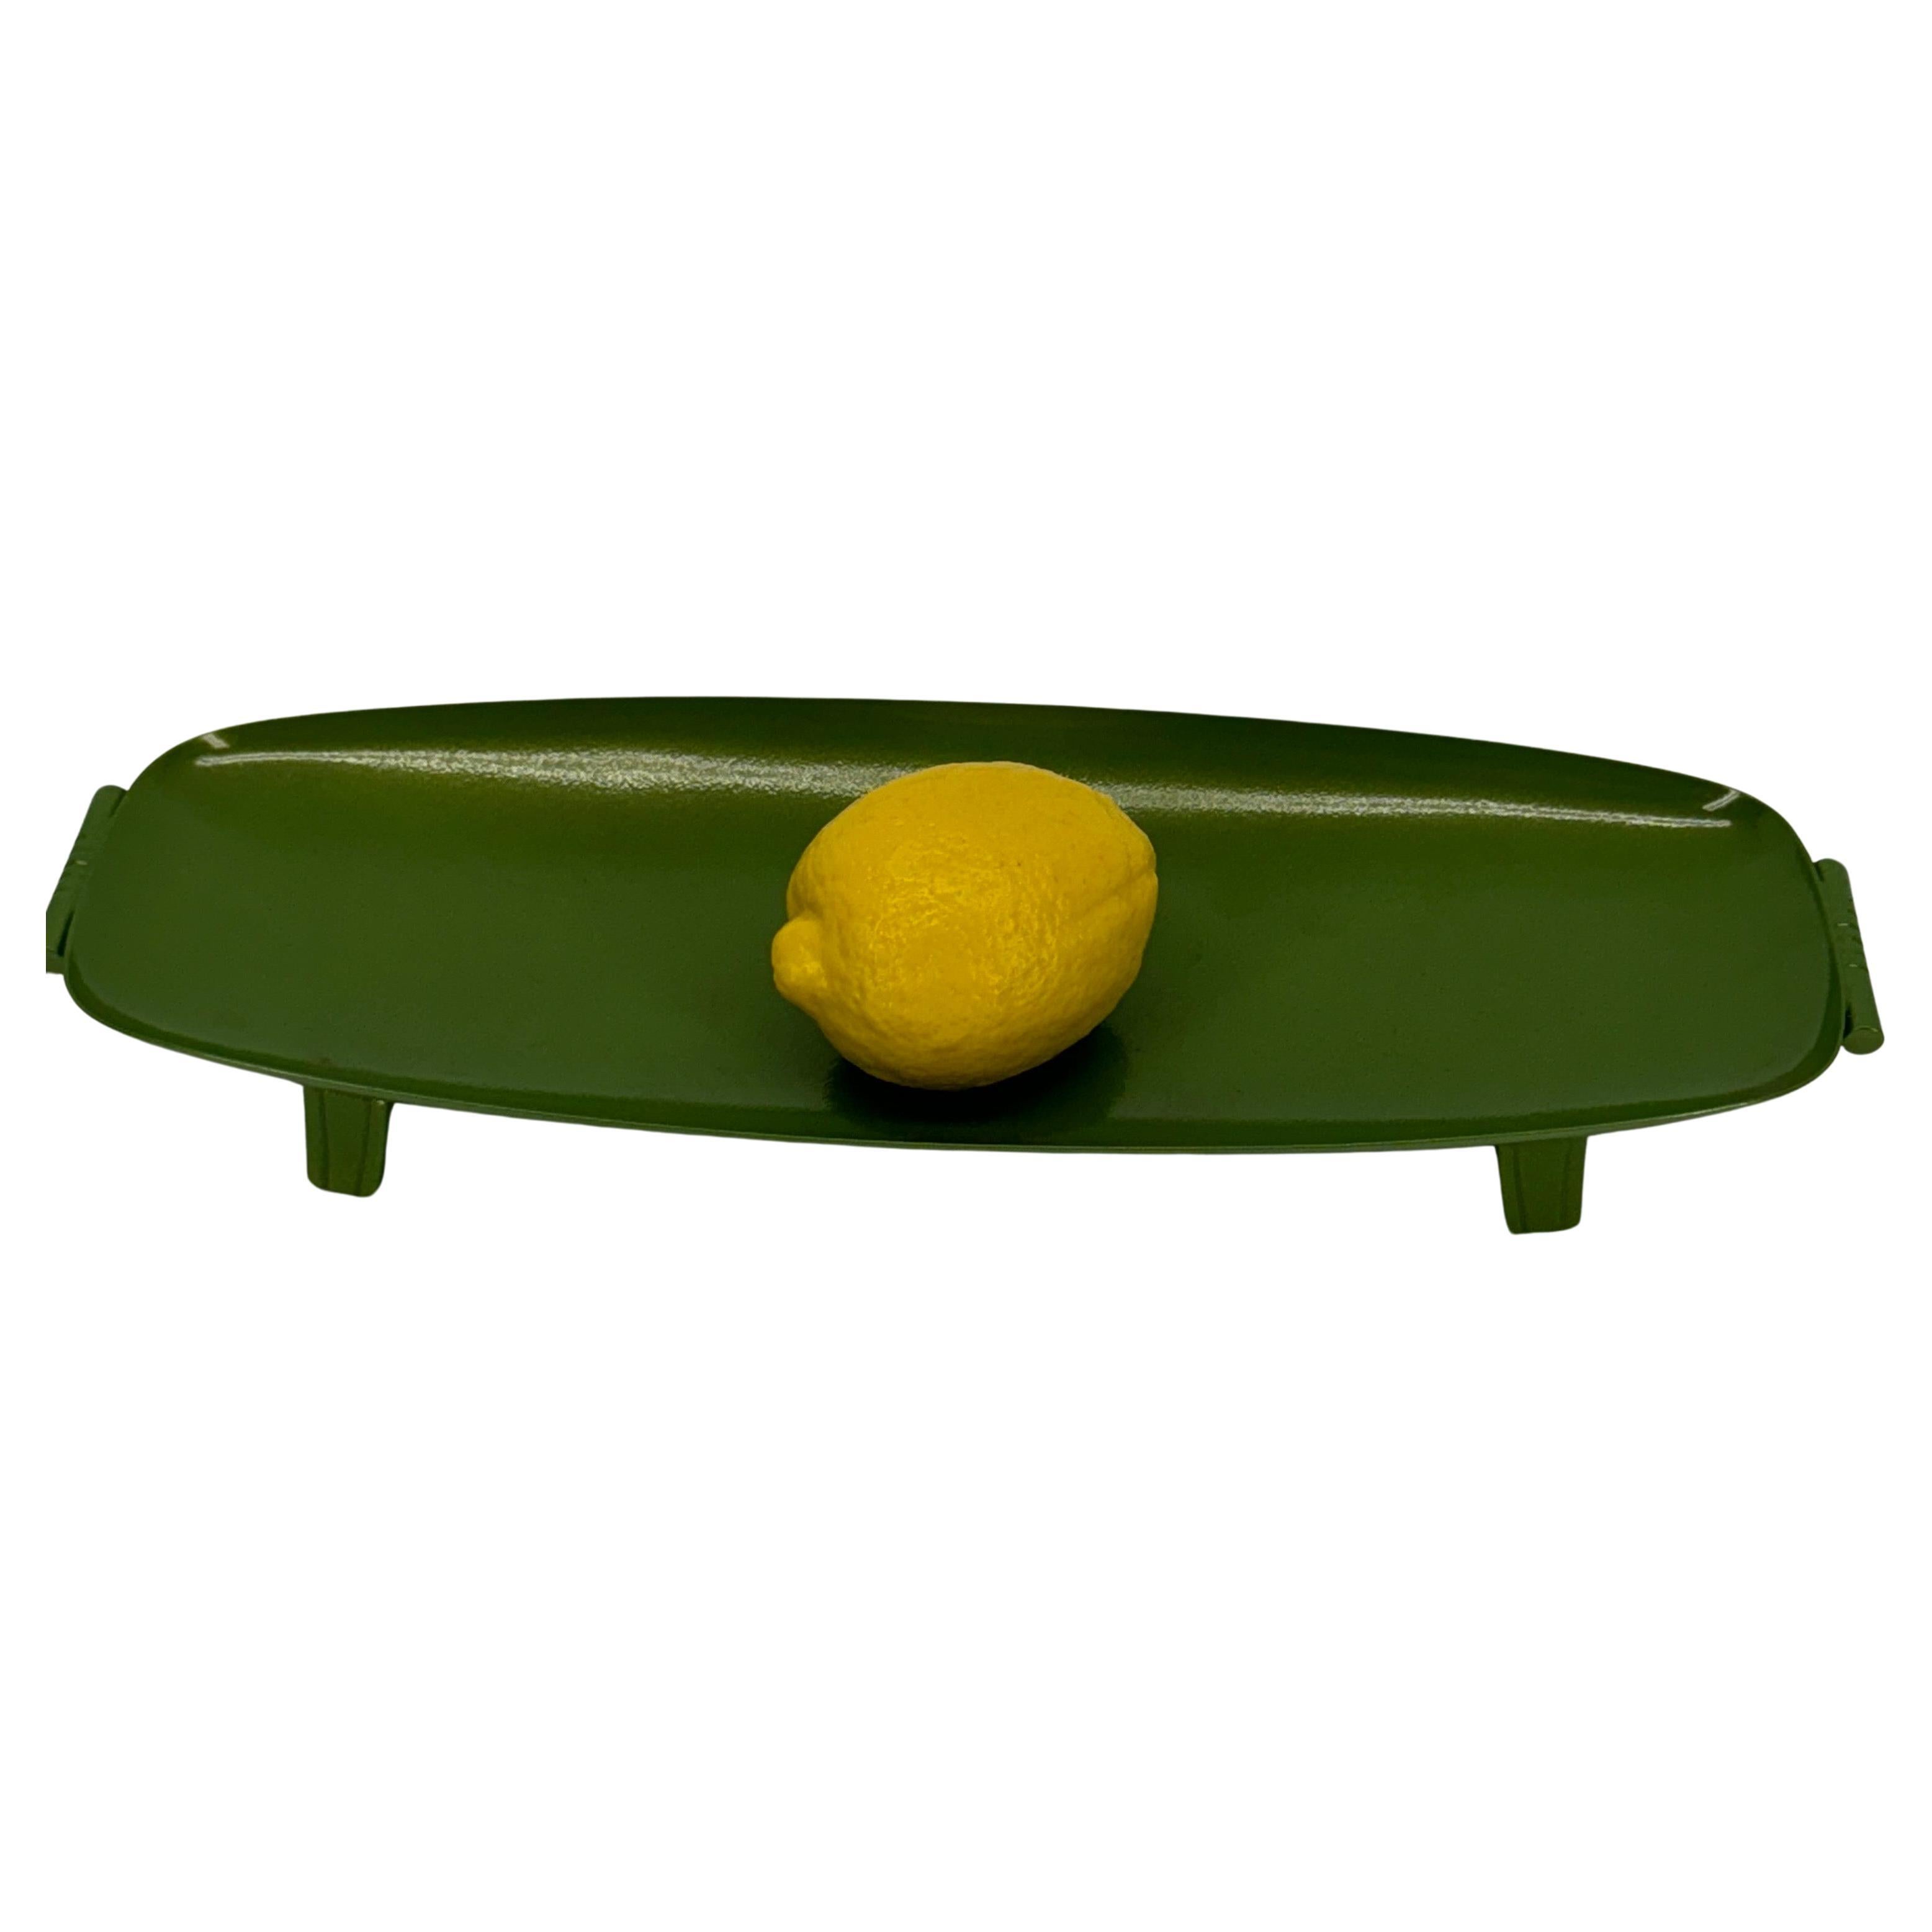 MCM Green Painted Metal Vide-Poche or Dish

A versatile newly powder coated vintage metal tray in a fantastic shade of green. This particular green color has been sought after in the decorating world as of late and could be used on a side or entry